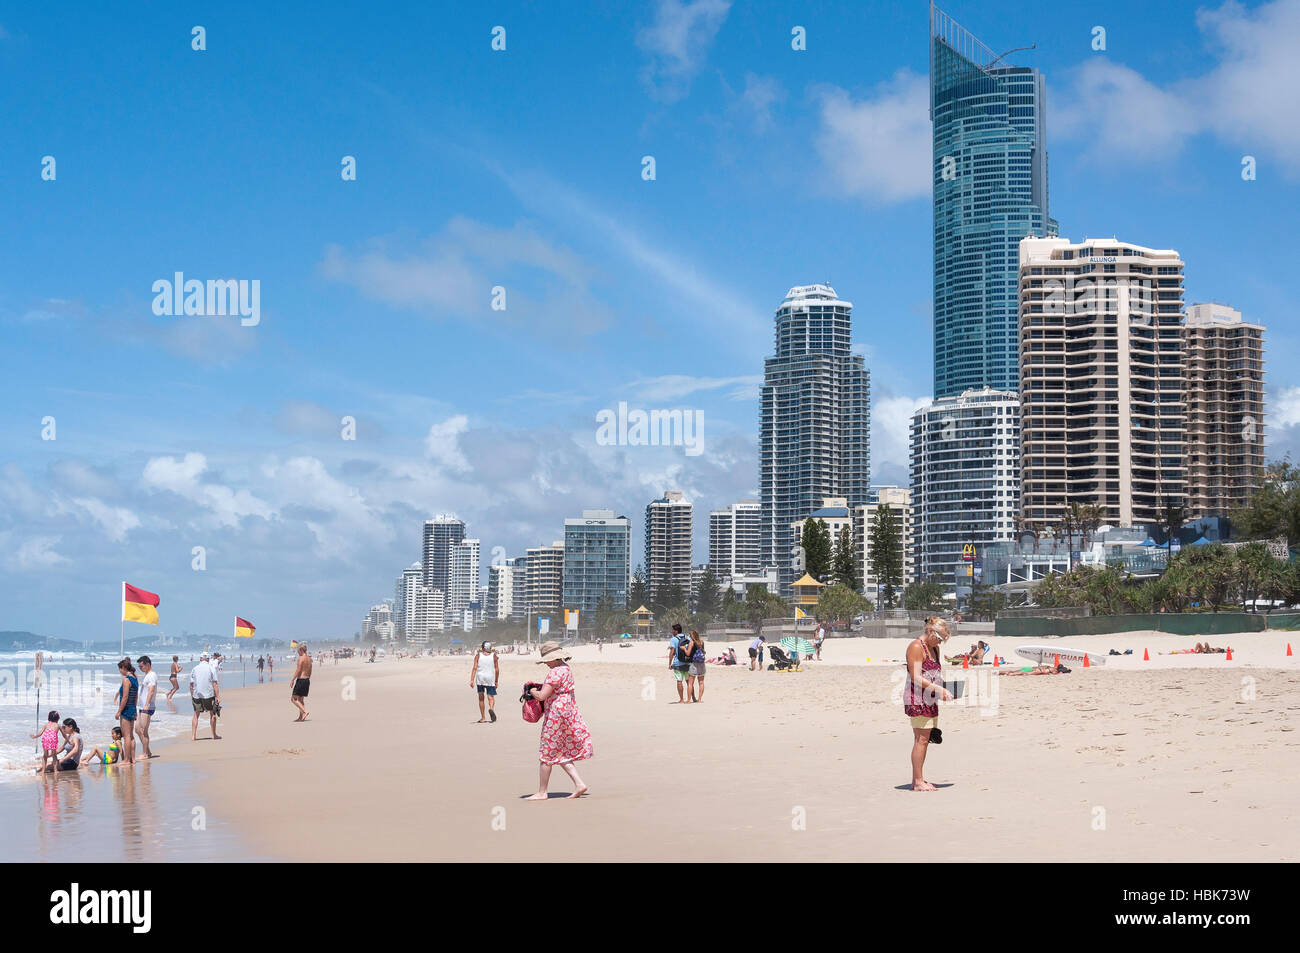 Surfers paradise sign hi-res stock photography and images - Alamy